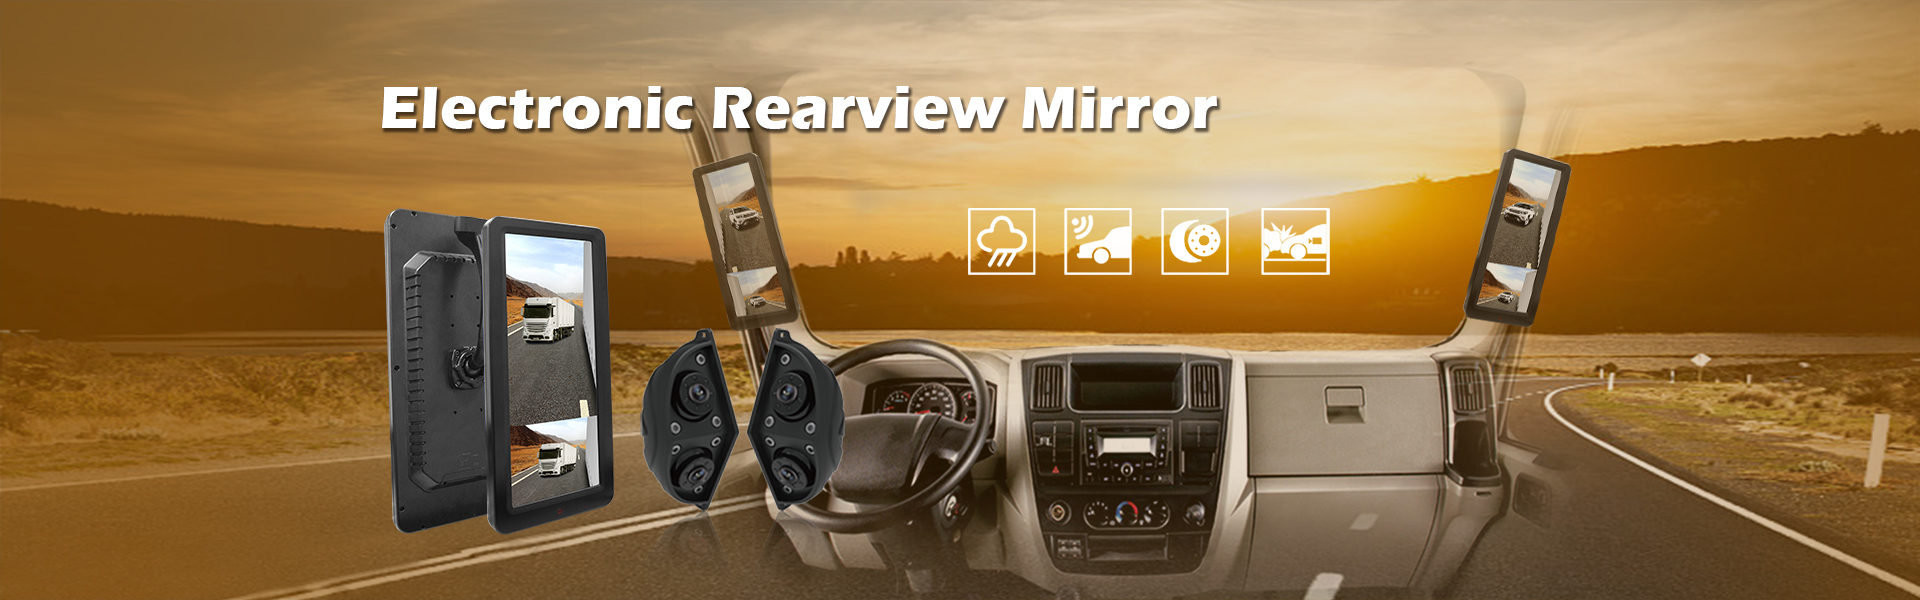 12.3 inch electronic mirror monitoring system